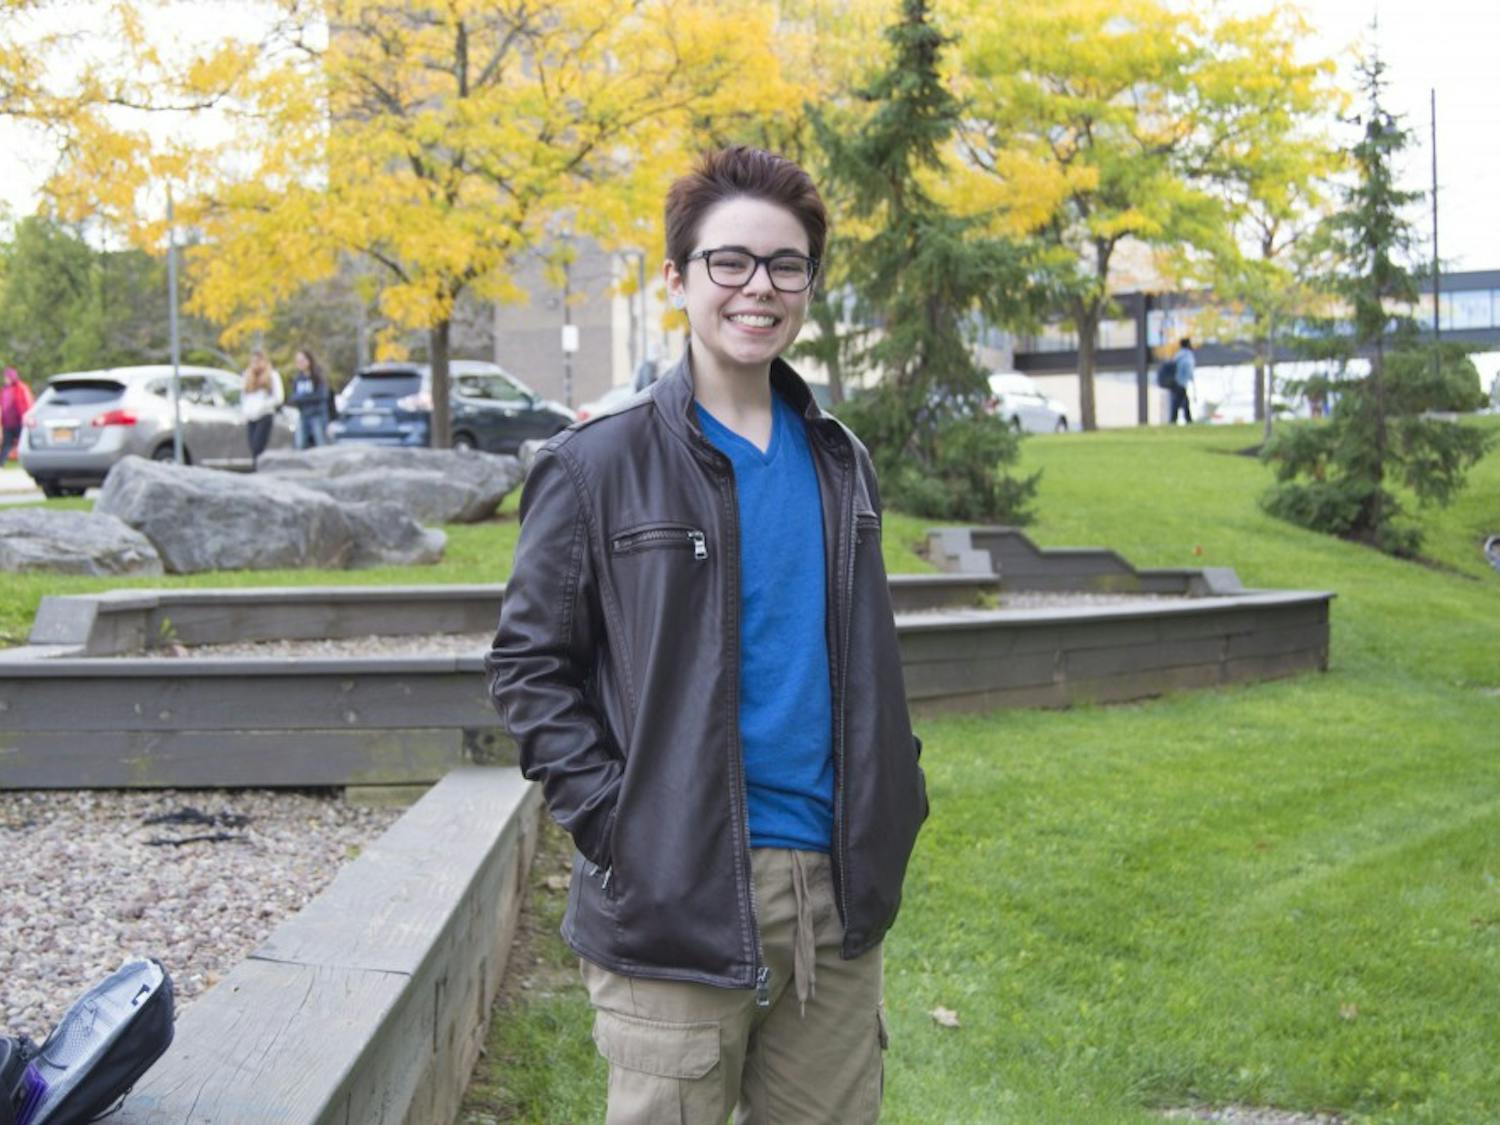 Tanner Miller, a freshman undecided major, is transitioning from female to male. After questioning his gender earlier this year, he decided the name Tanner and masculine pronouns better suit him.